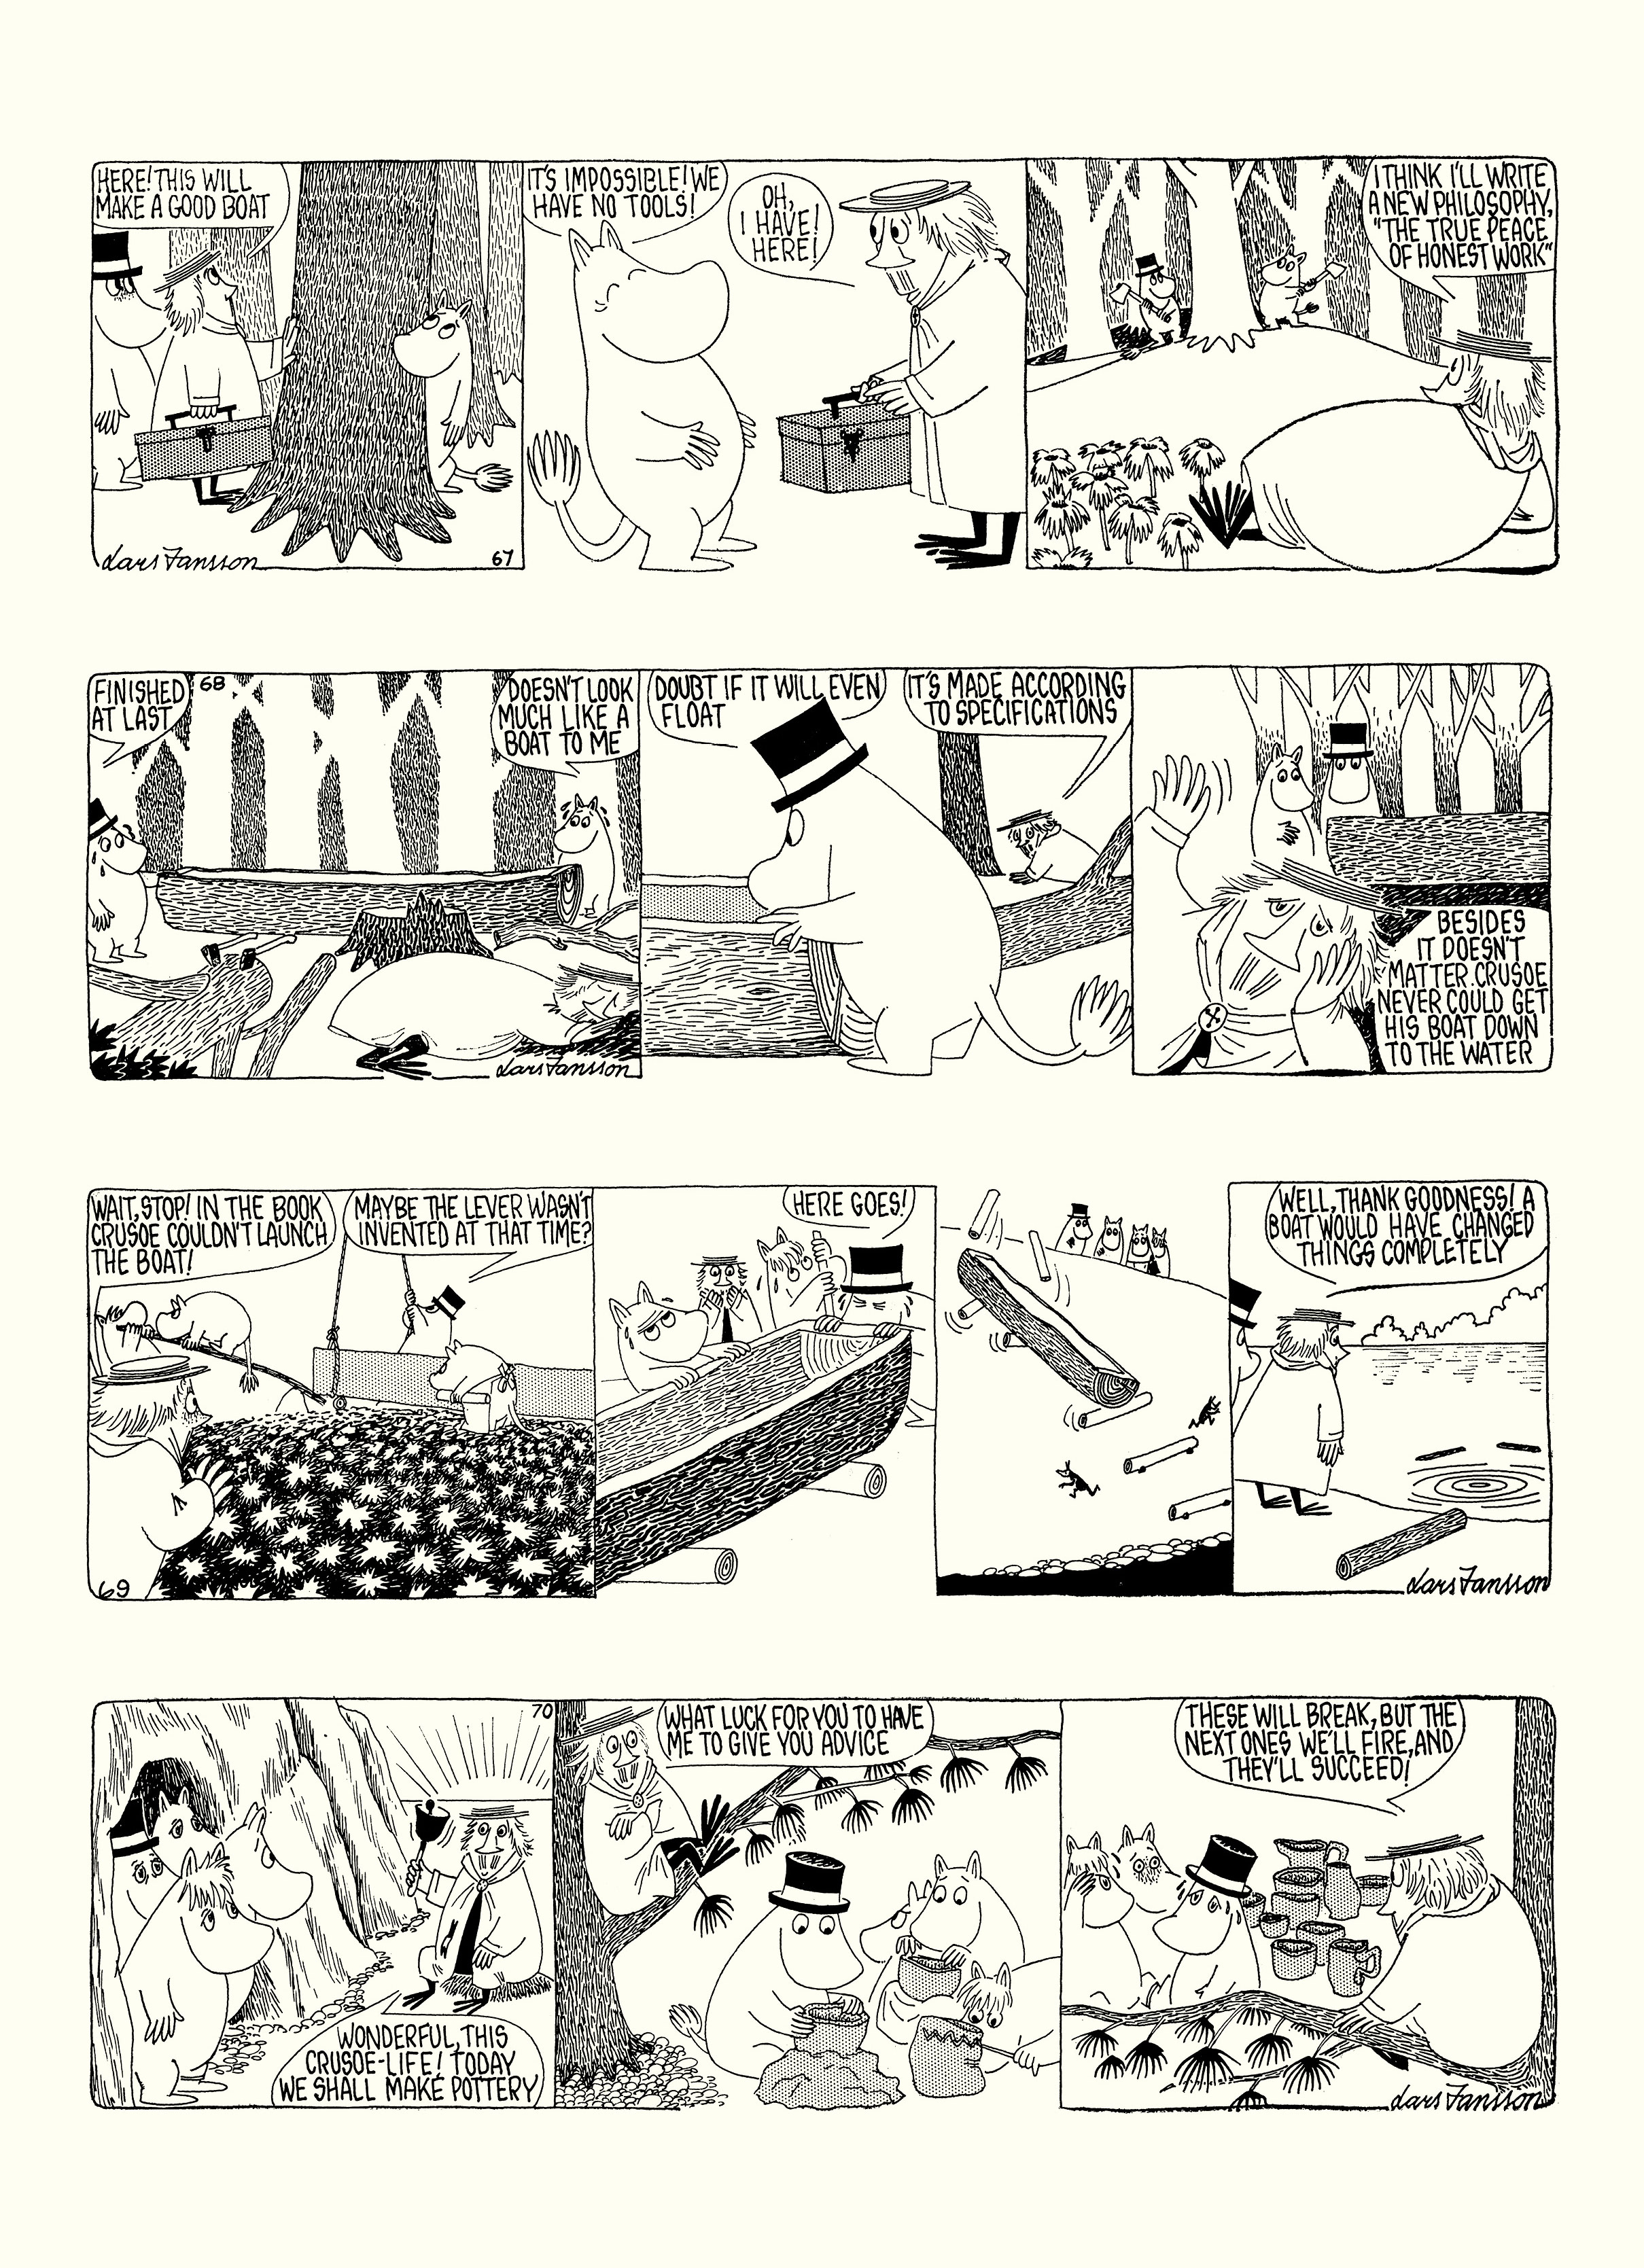 Read online Moomin: The Complete Lars Jansson Comic Strip comic -  Issue # TPB 8 - 22